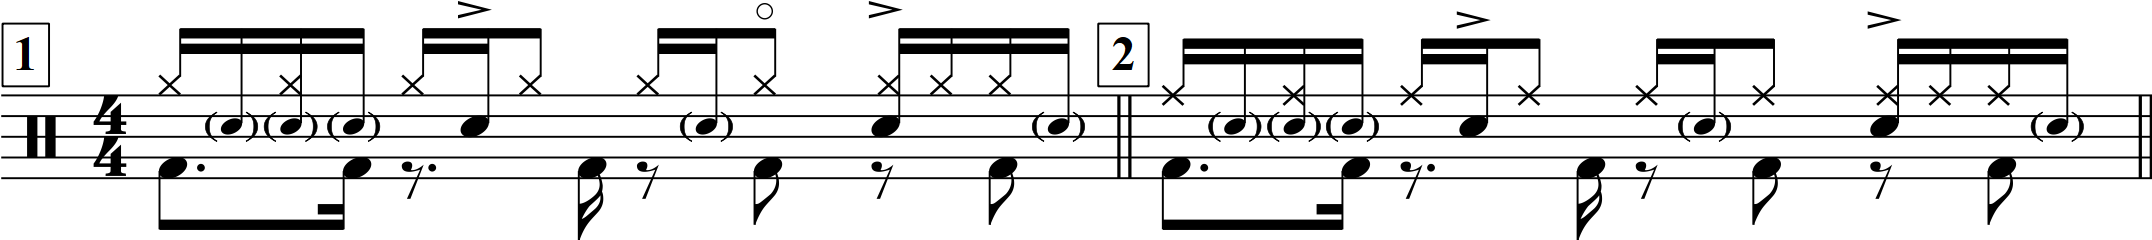 Drum notation for the "The Groove" drum lesson.